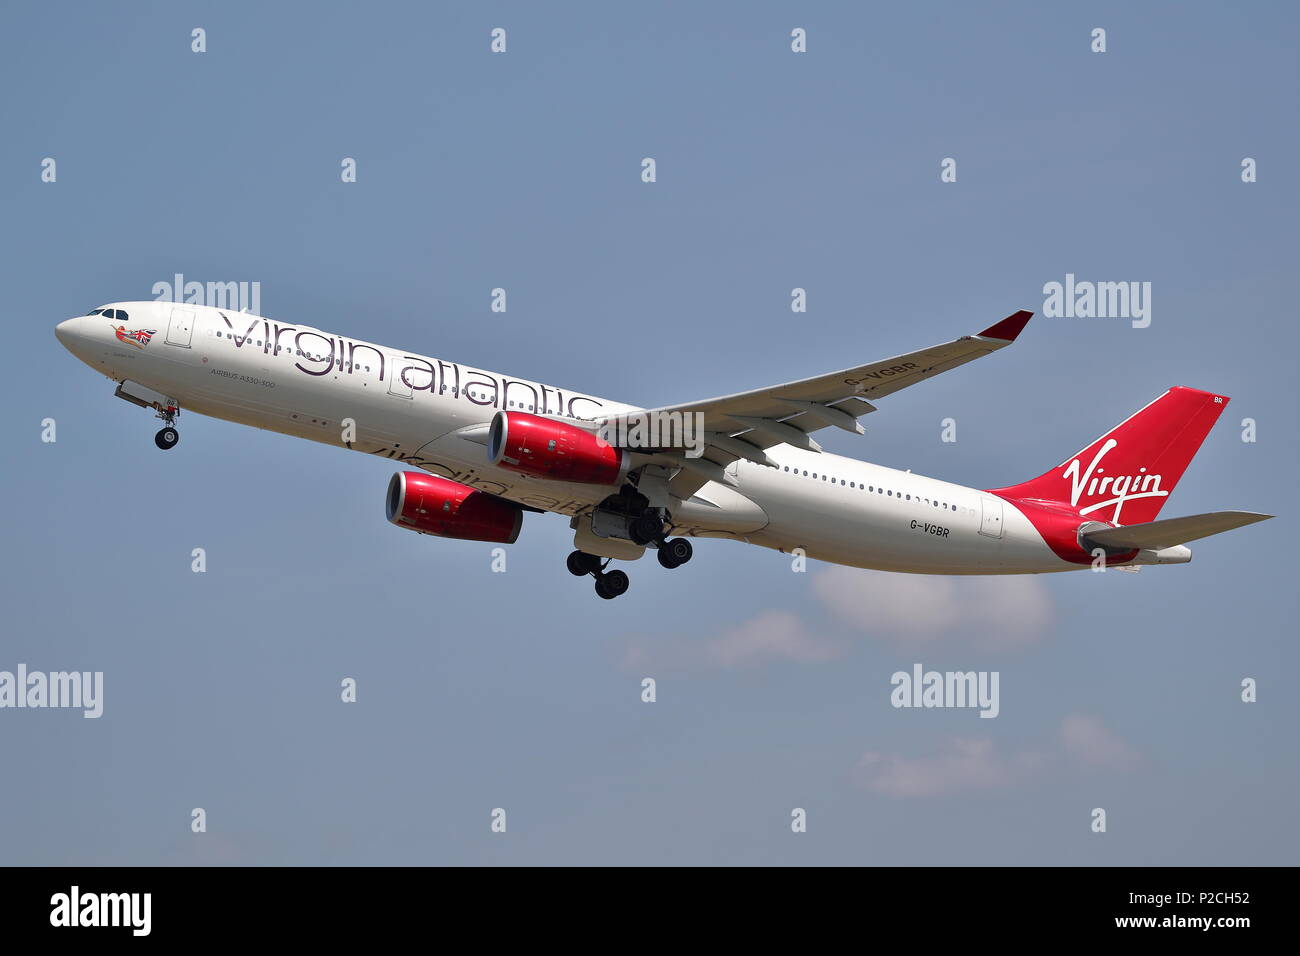 Virgin Atlantic Airlines Airbus A330 G-VGBR taking off from London Heathrow Airport, UK Stock Photo